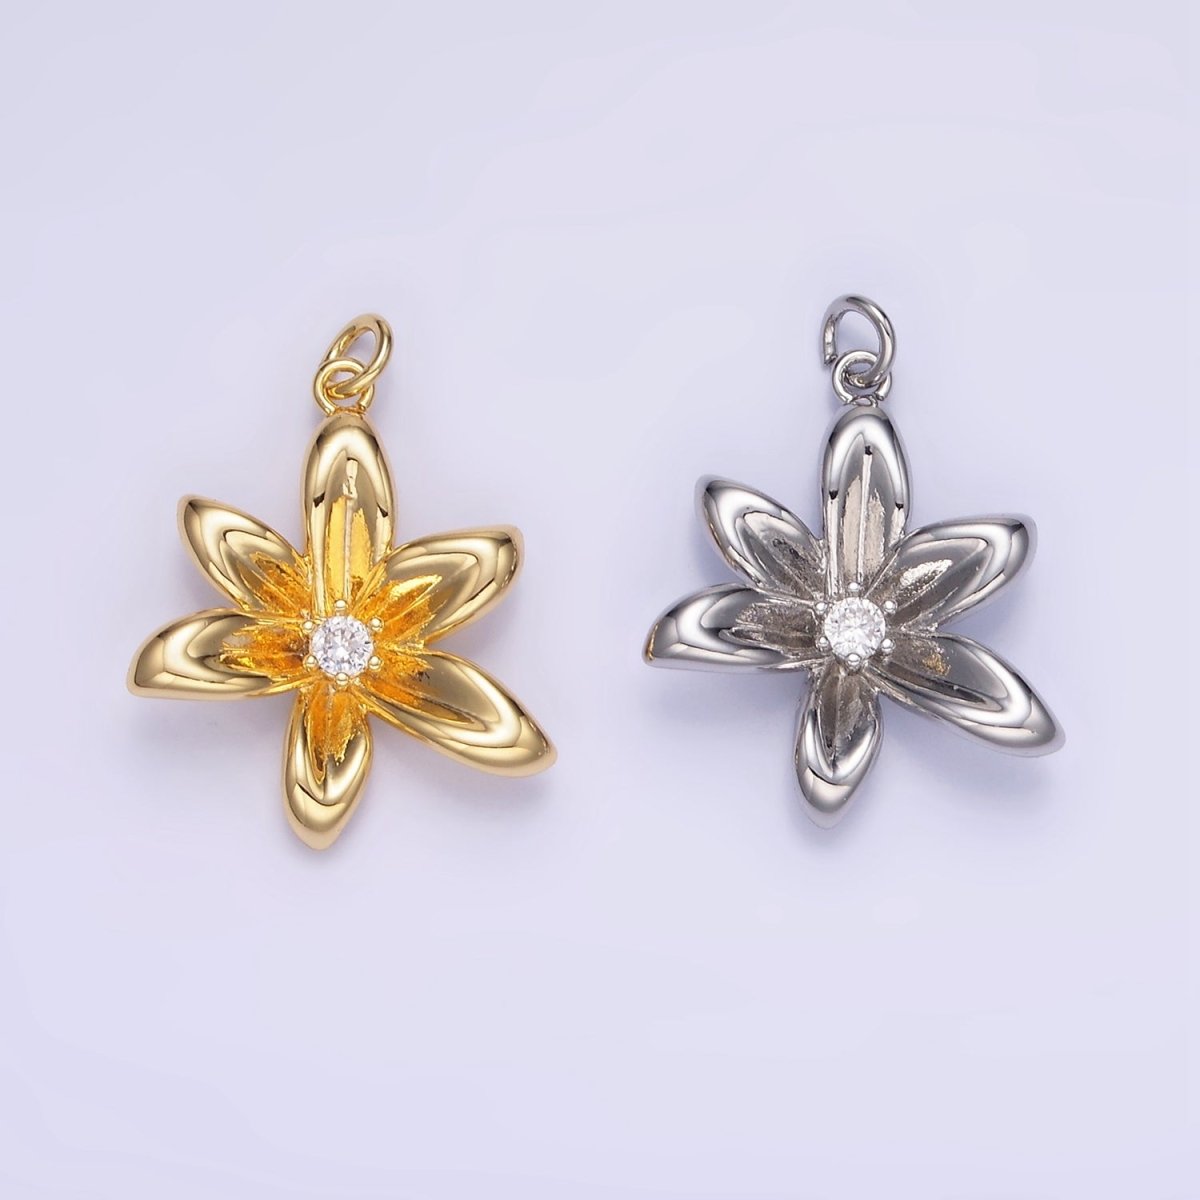 24K Gold Filled CZ Flower Personalized Charm in Gold & Silver | W773 - DLUXCA